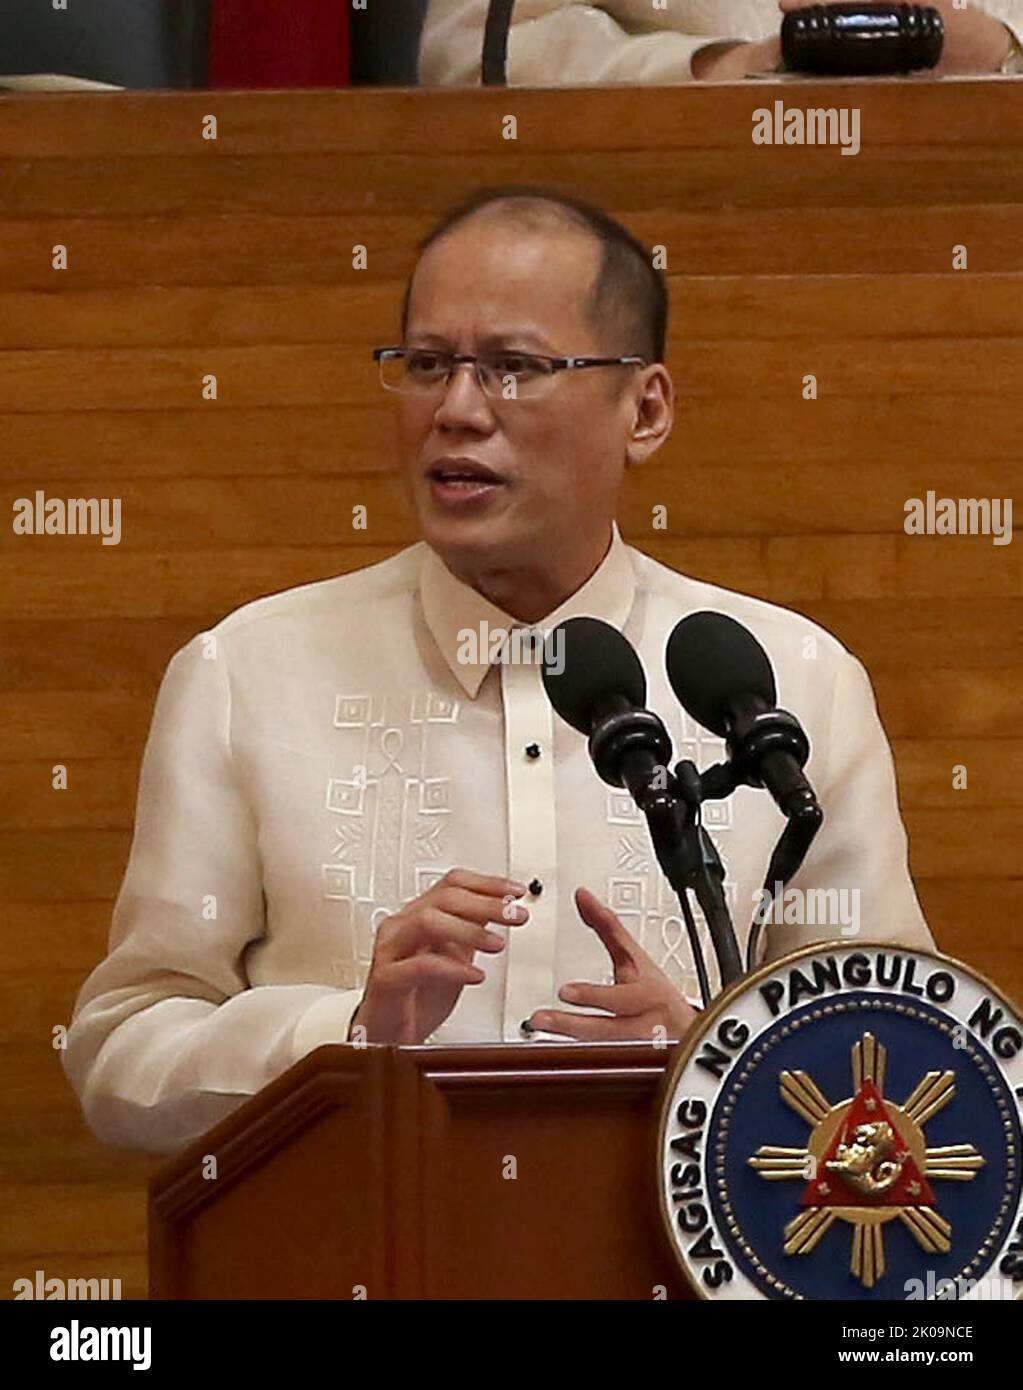 Benigno Aquino III (1960 - 2021), Filipino politician who served as the 15th president of the Philippines from 2010 to 2016. Before being elected president, Aquino was a member of the House of Representatives and Senate from 1998 to 2010, and also served as a deputy speaker of the House of Representatives from 2004 to 2006. Stock Photo